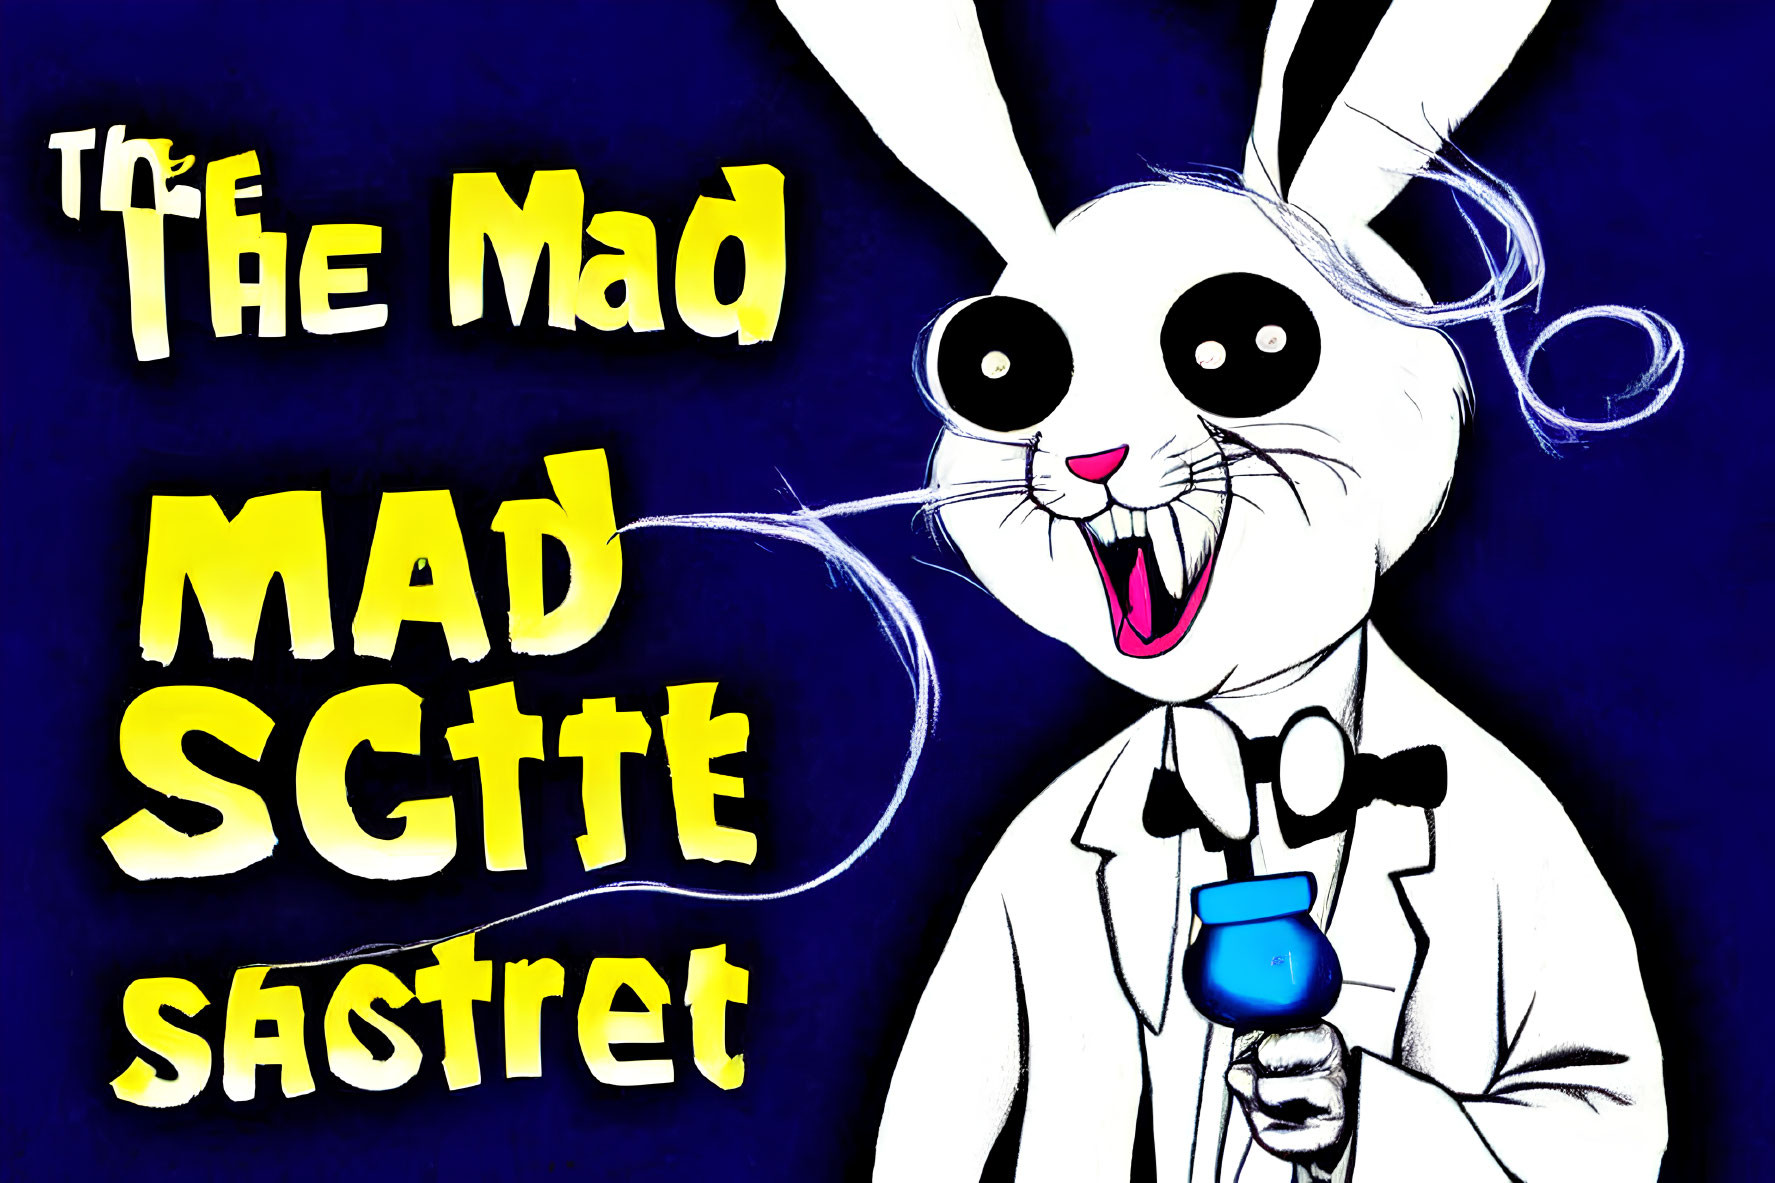 Cartoon of a white rabbit in lab coat with beaker - "The Mad MAD Scientist